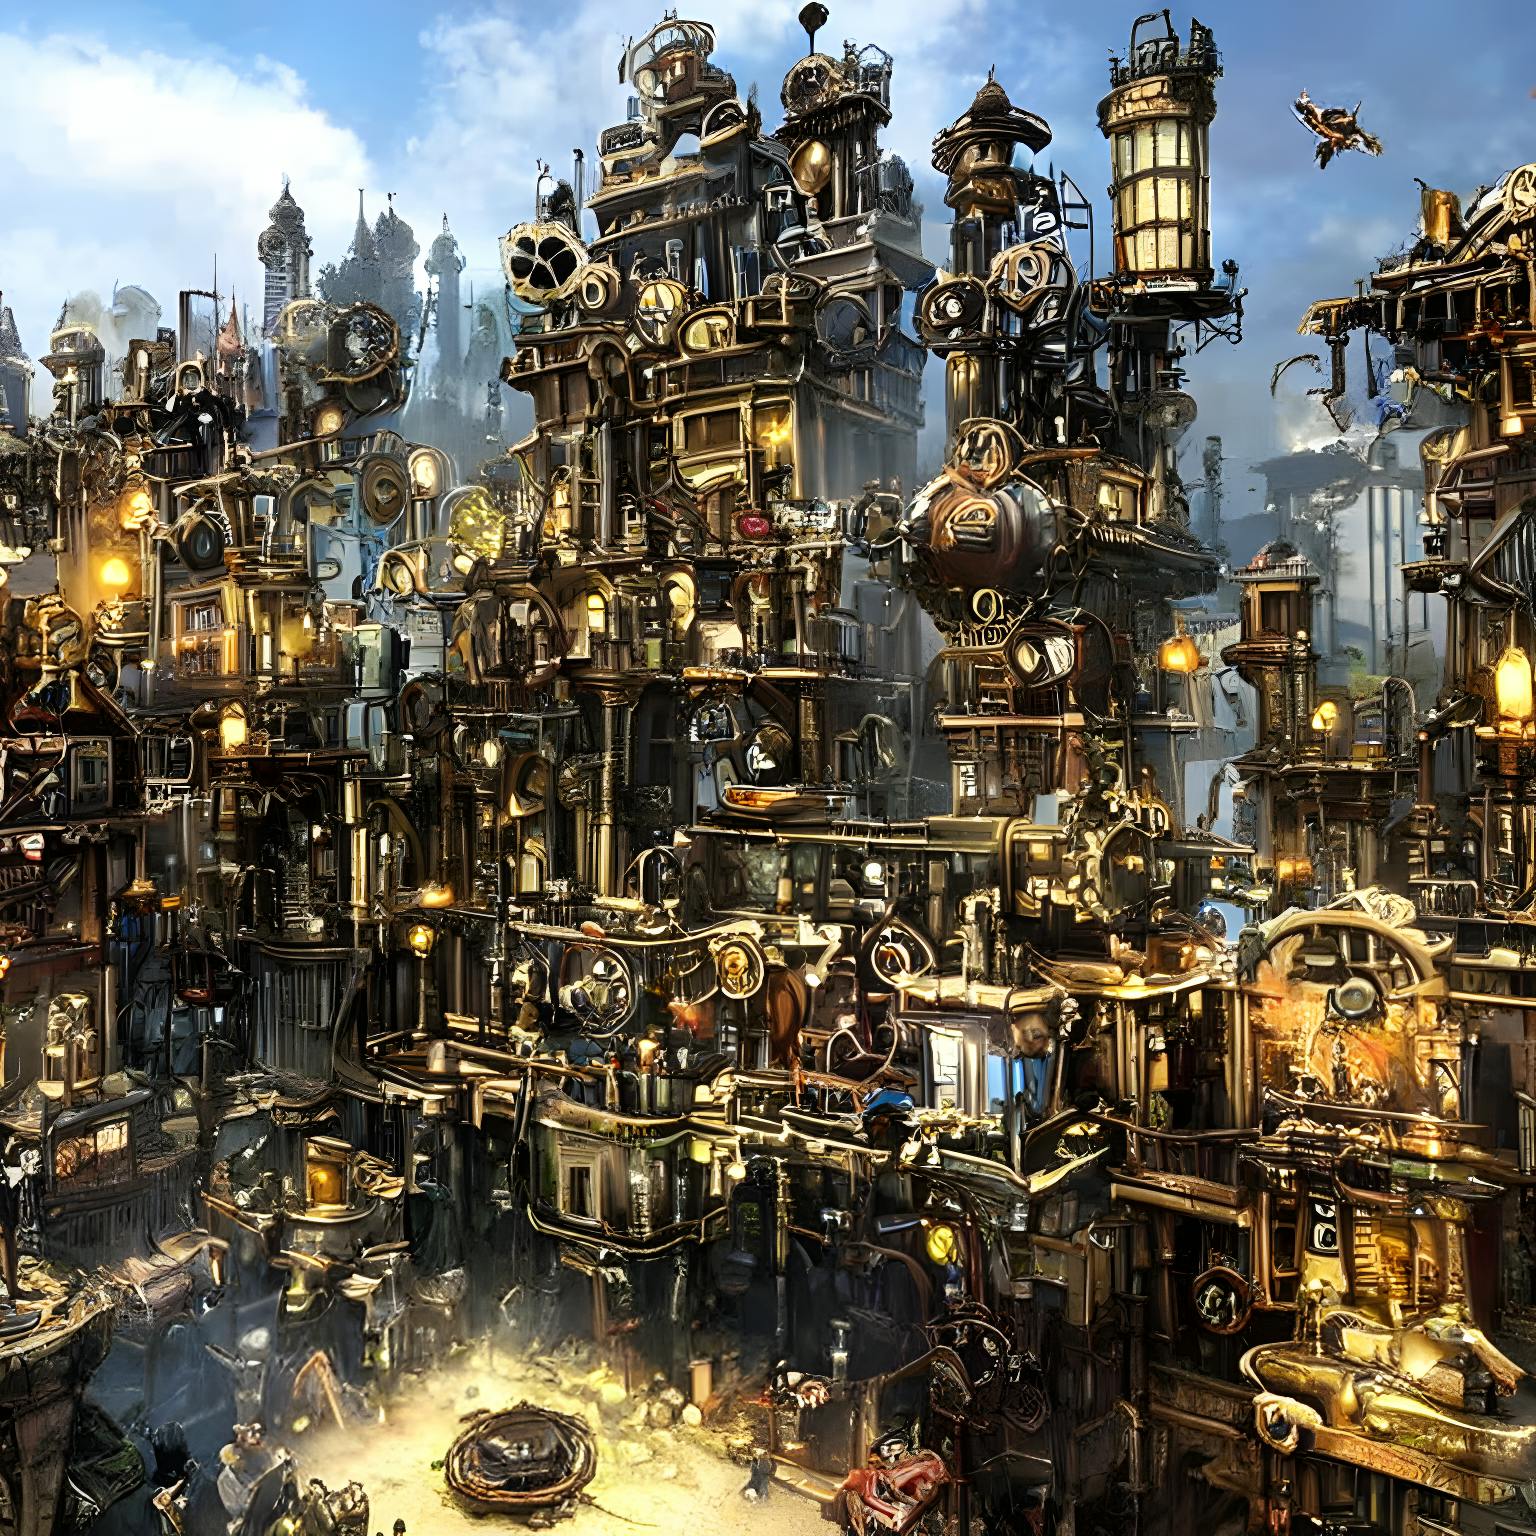 /the-history-and-aesthetic-of-steampunk-could-we-build-a-steampunk-world feature image